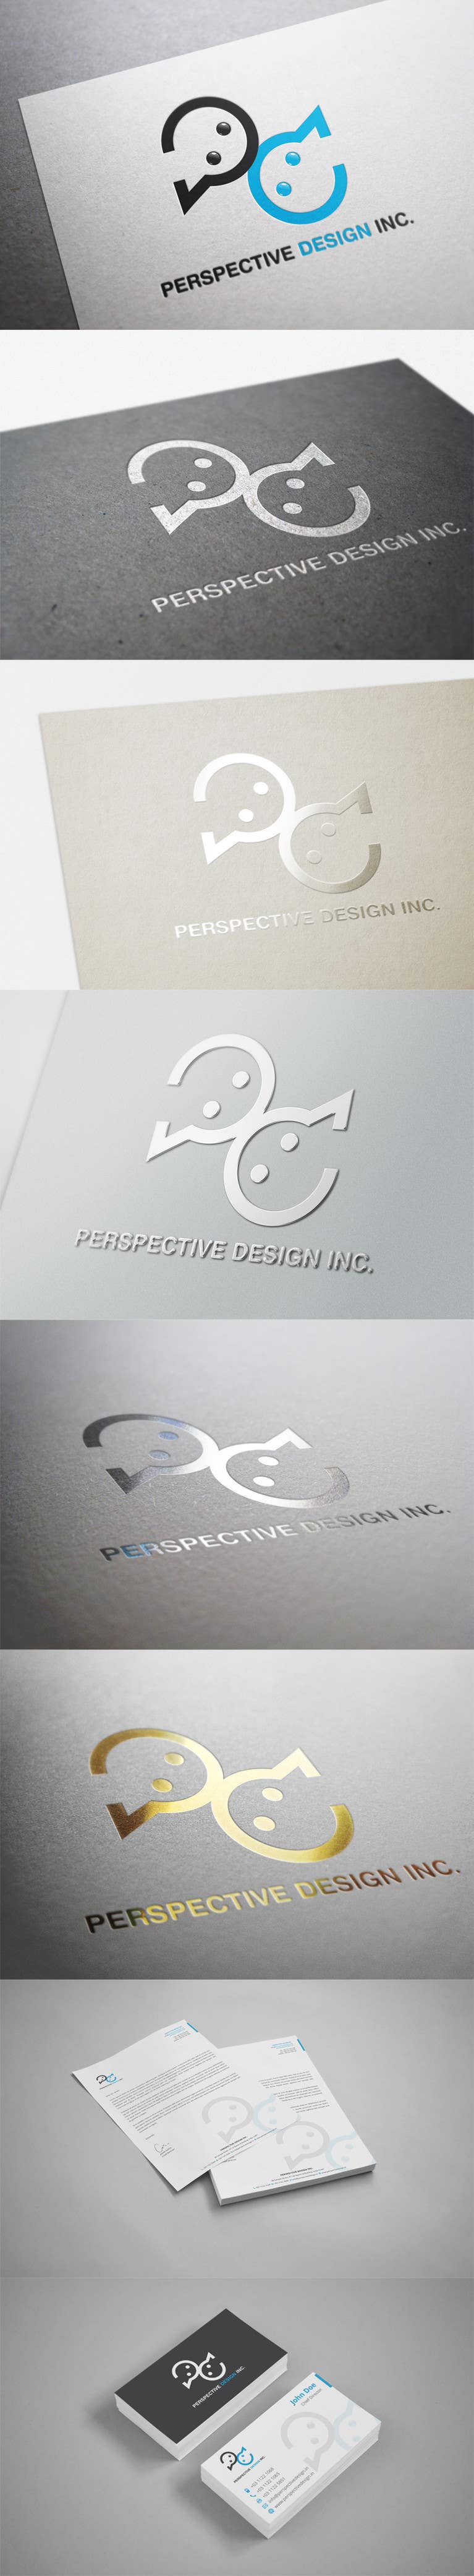 Contest Entry #156 for                                                 Design a Logo for Perspective Design Inc.
                                            